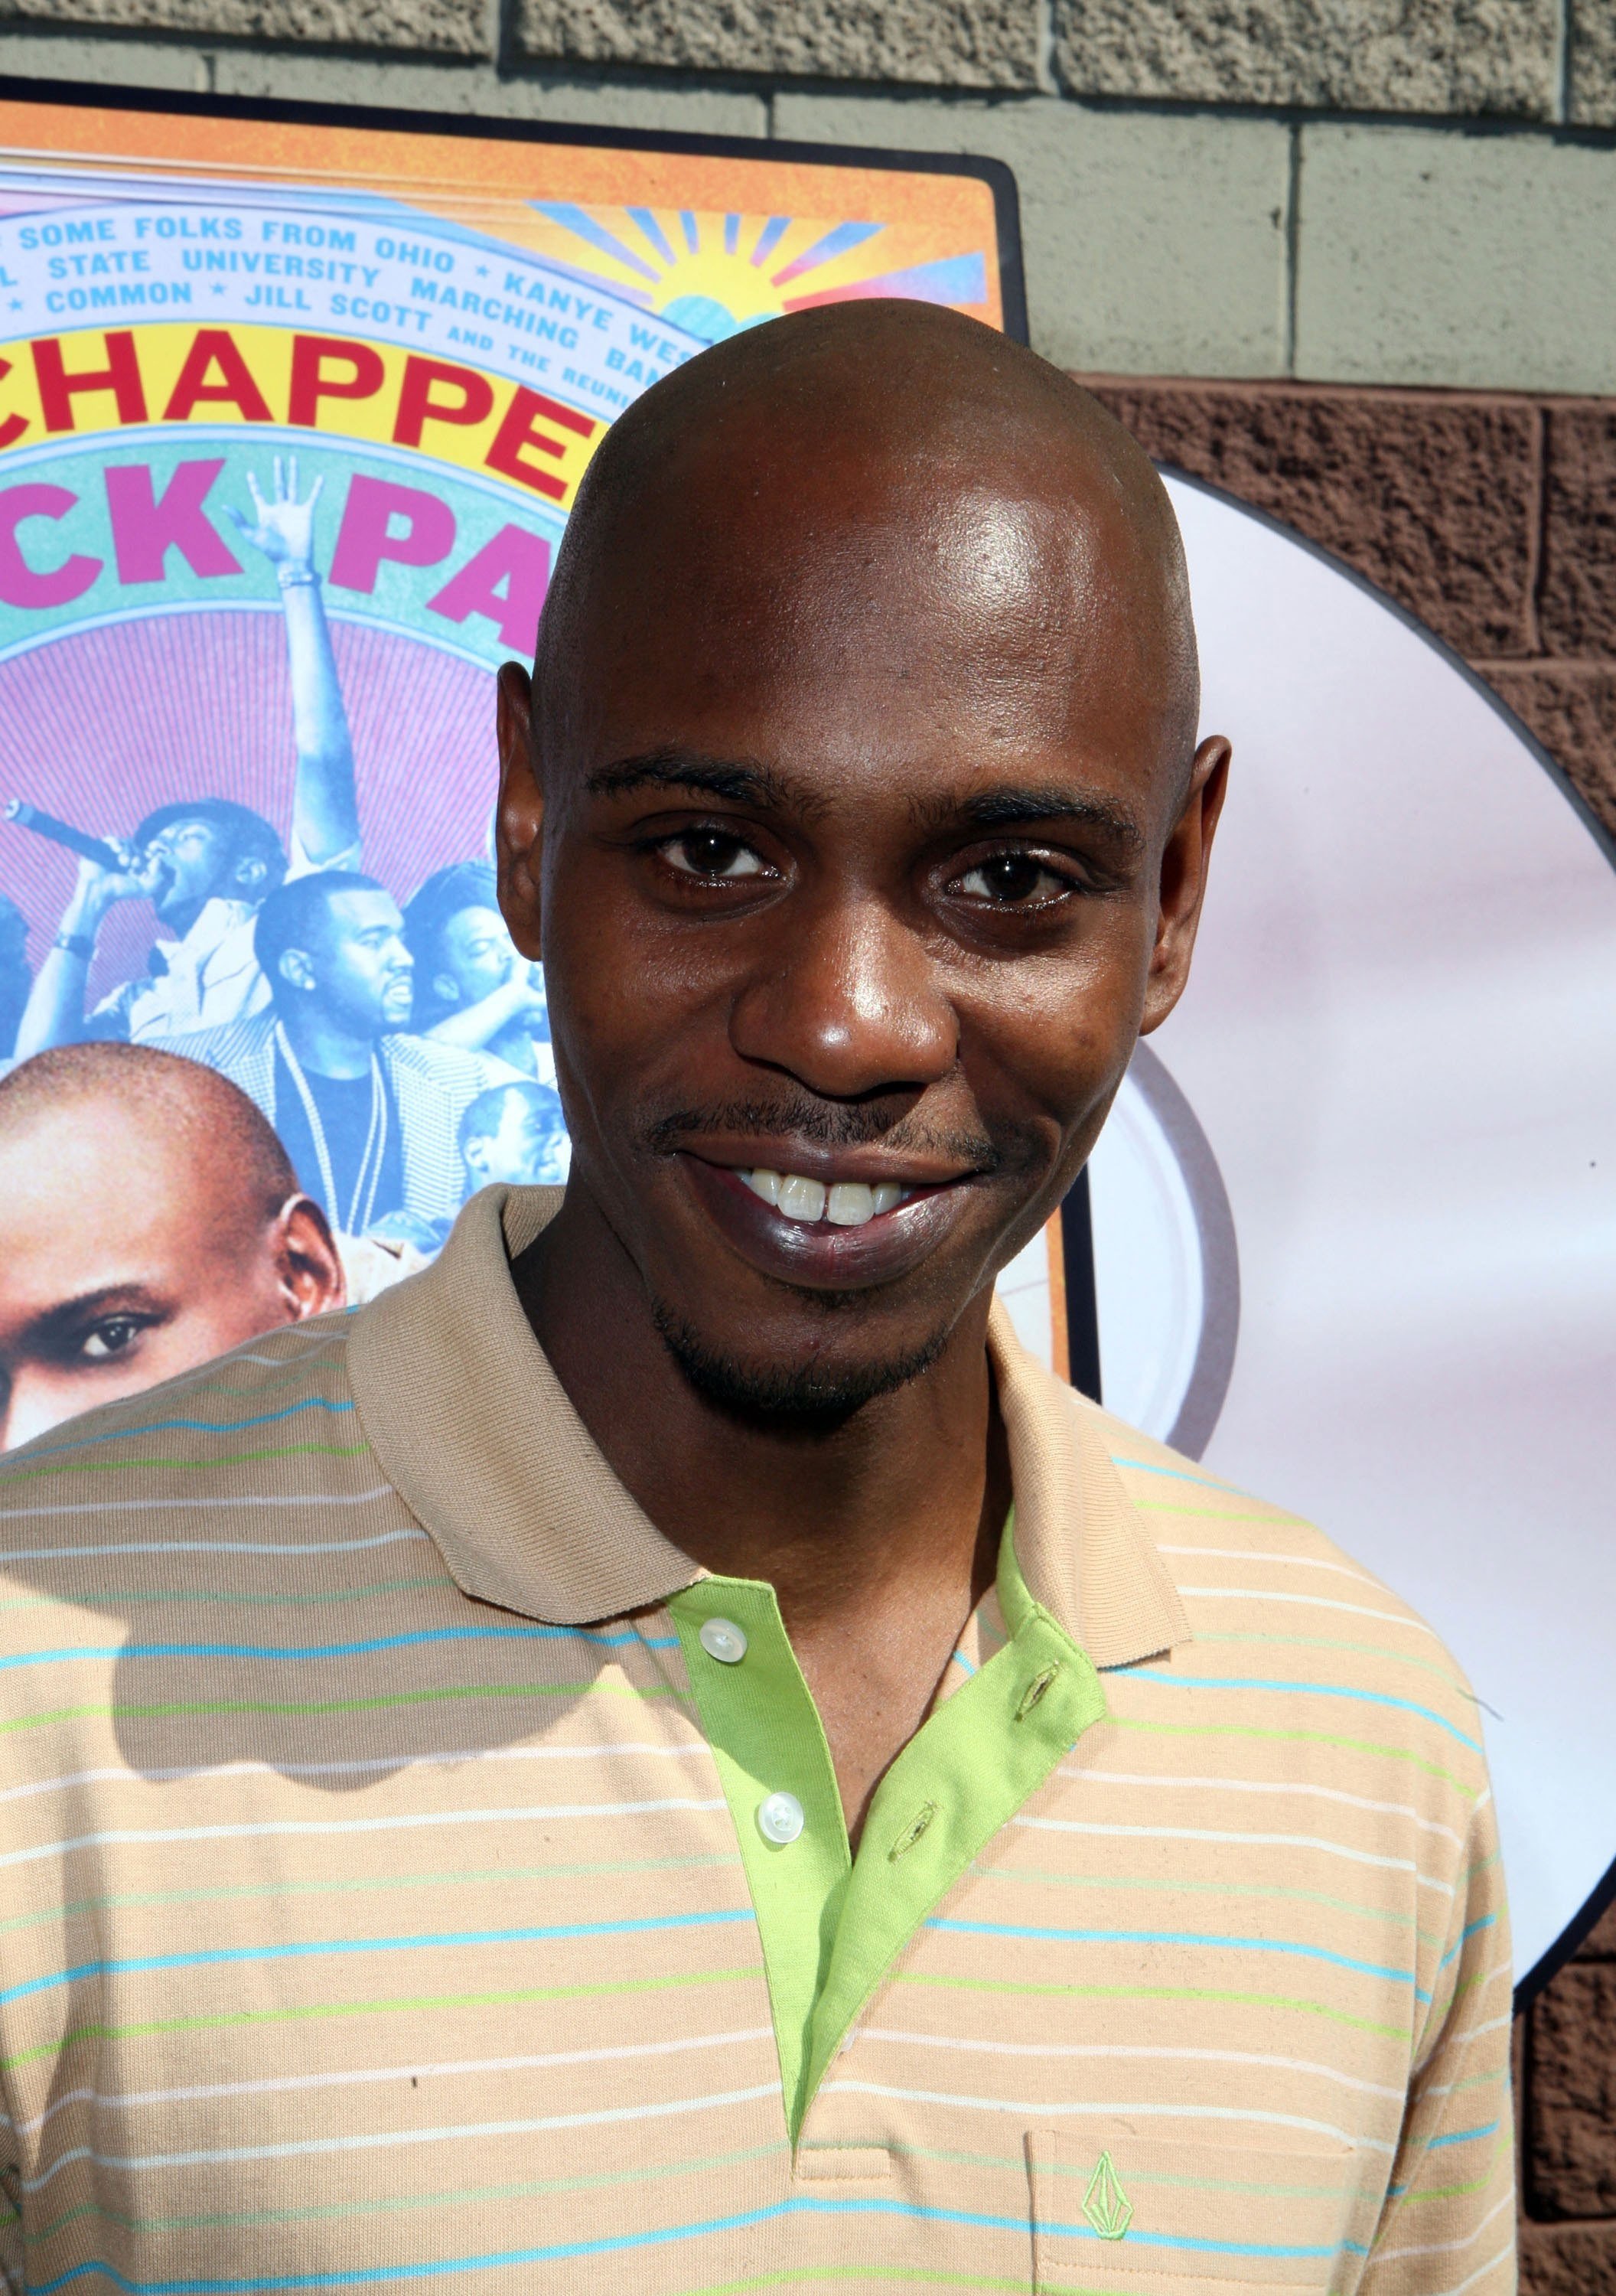 David Khari Webber &quot;Dave&quot; Chappelle was born on August 24, 1973 in Washington, D.C. He is a comedian, screenwriter, television/film producer and actor. - dave_chappelle